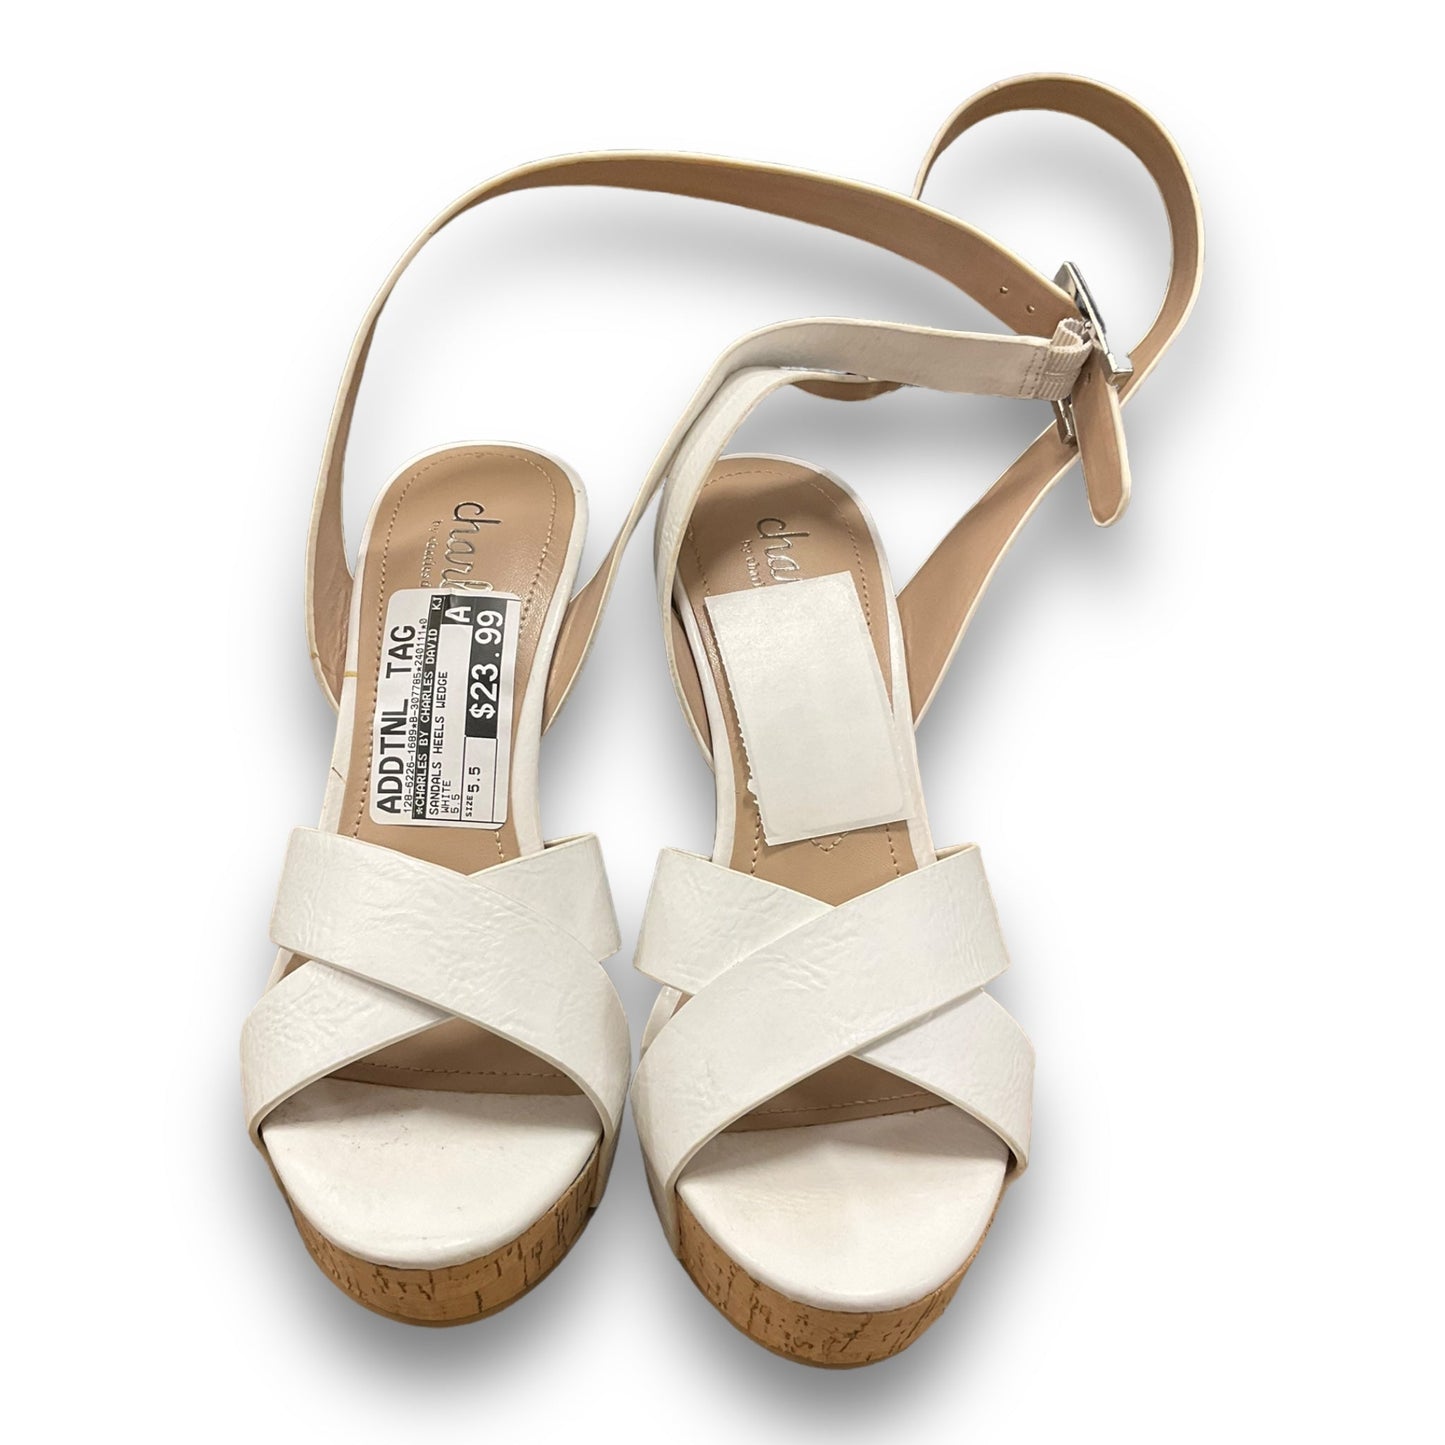 Sandals Heels Wedge By Charles By Charles David  Size: 5.5